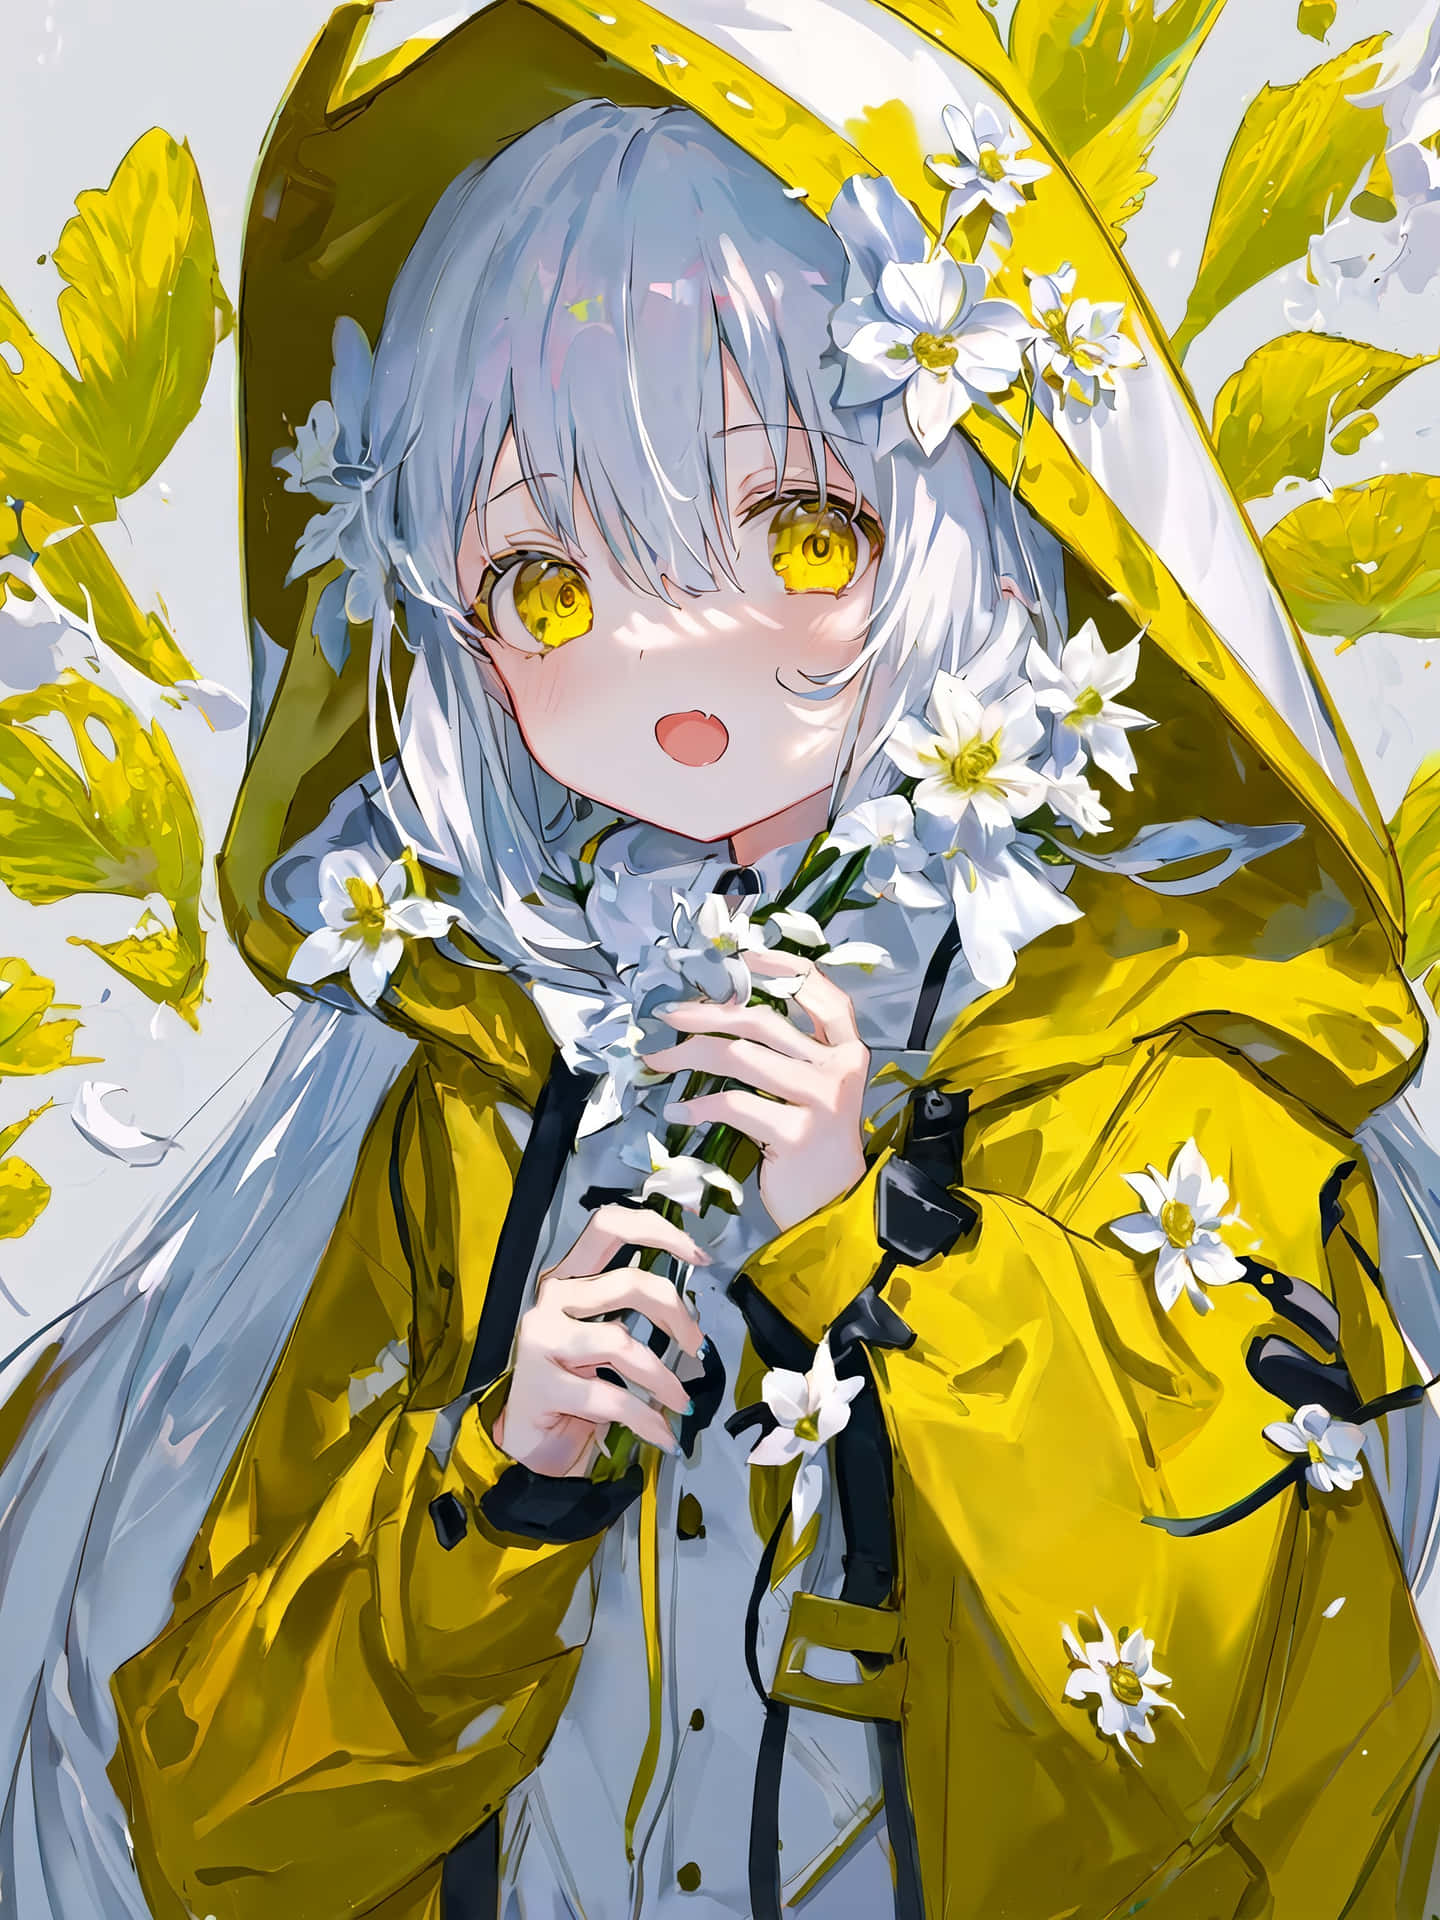 A person wearing a vibrant yellow raincoat on a rainy day Wallpaper